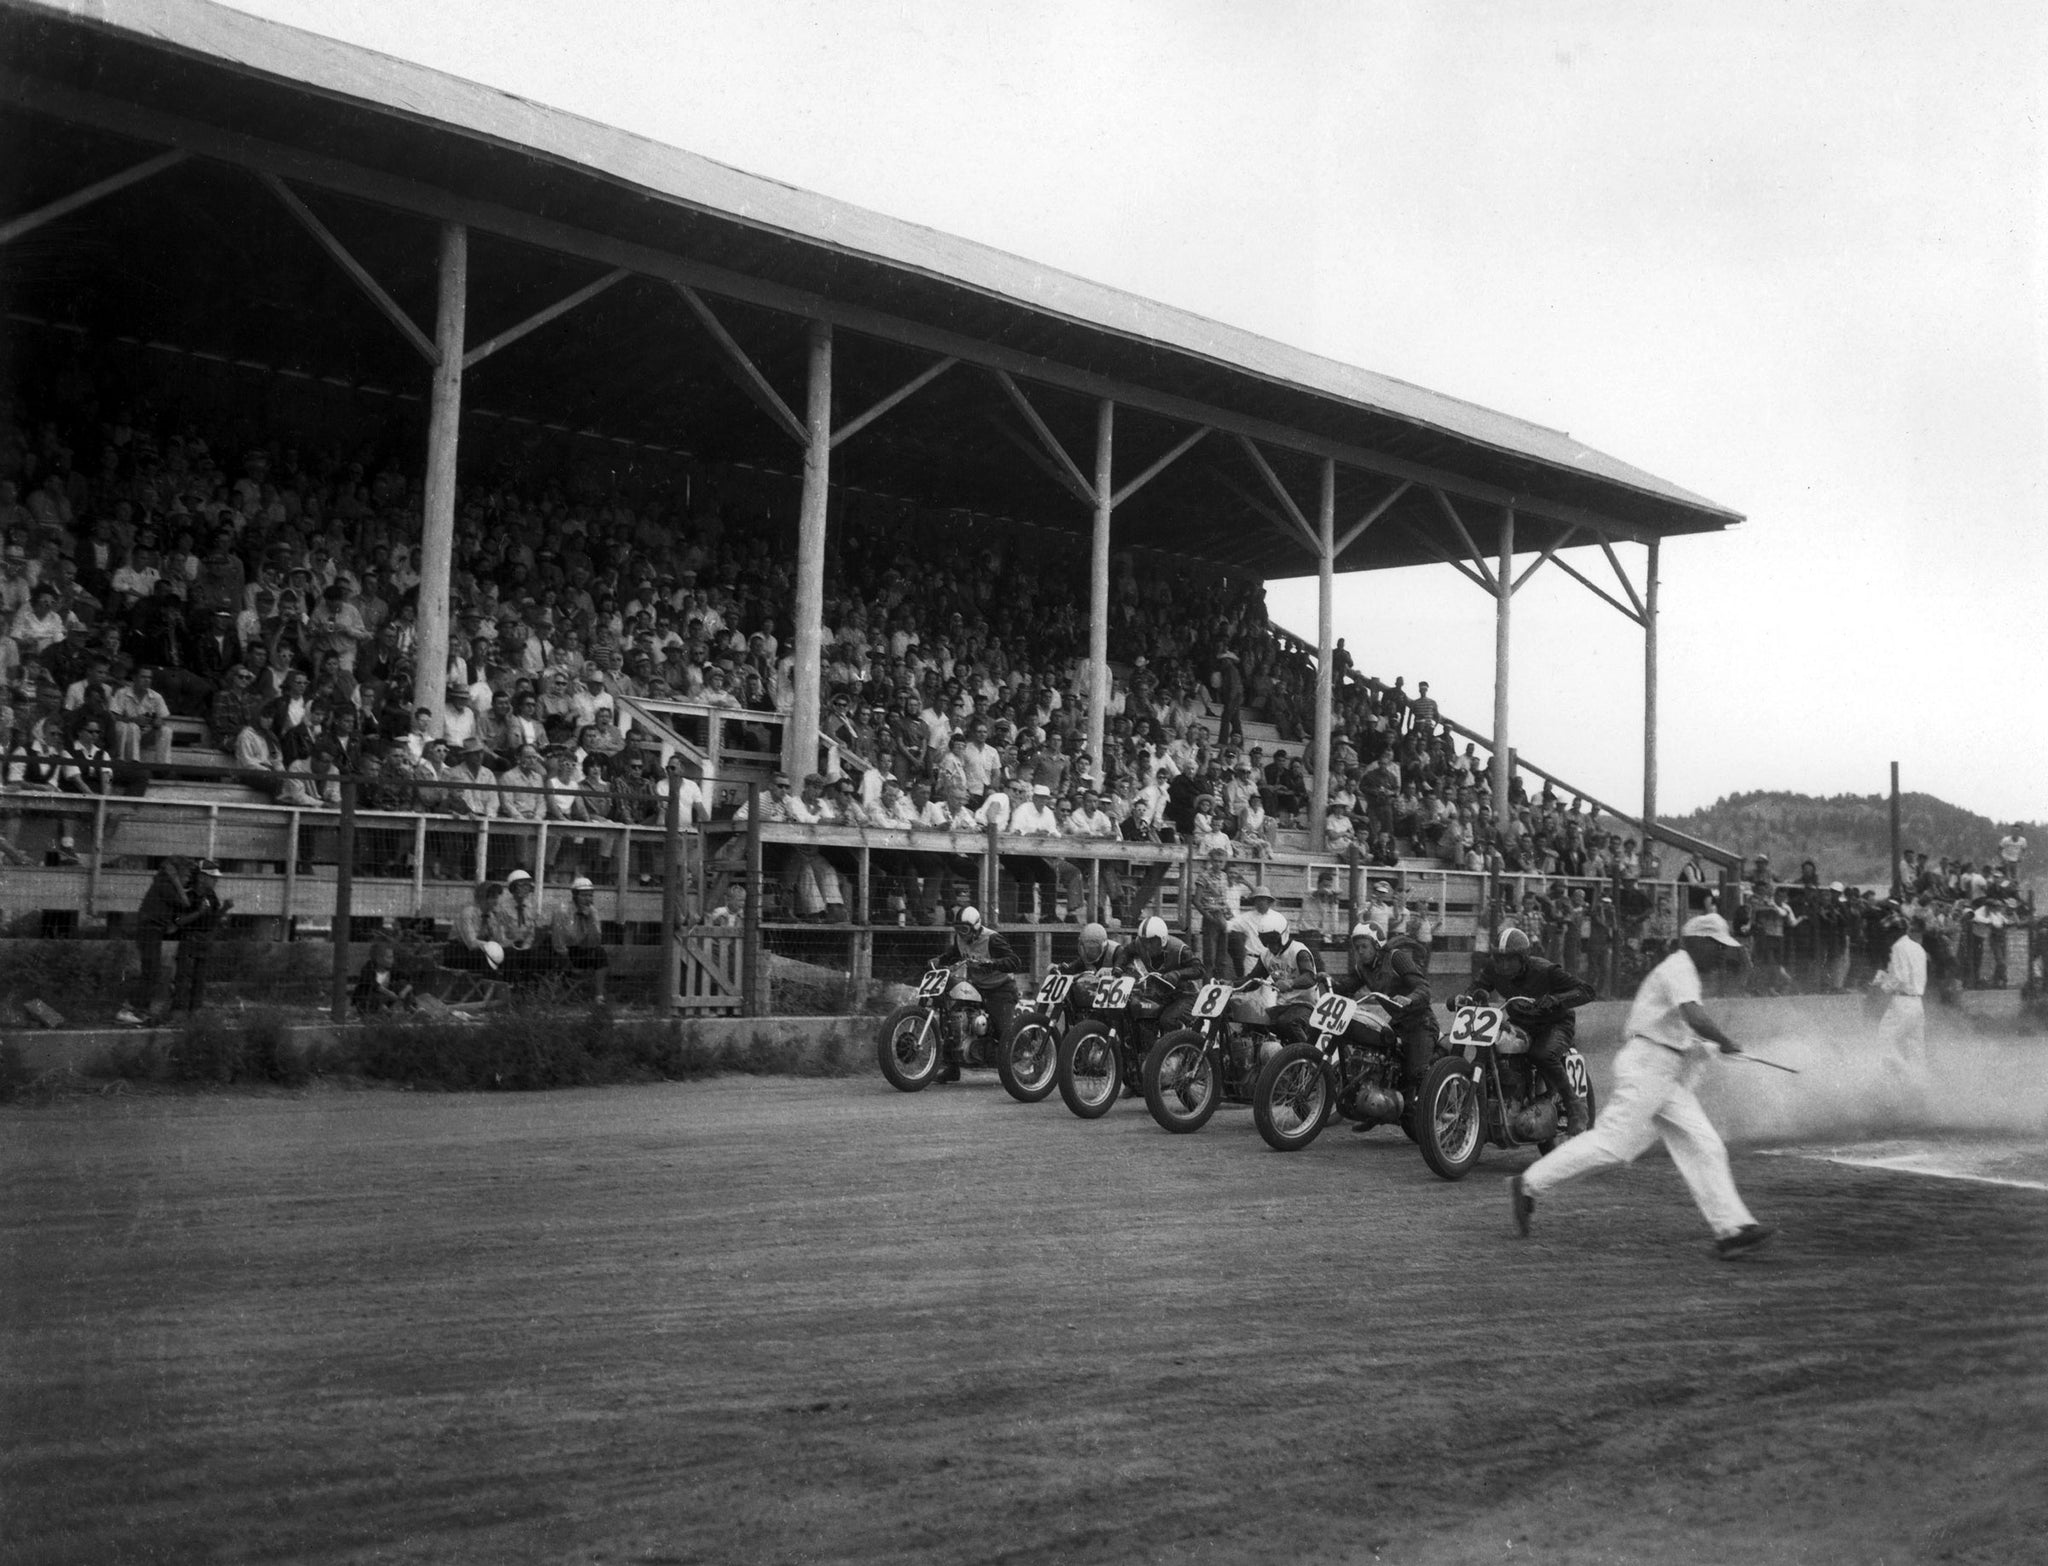 Motorcycle racers speed off from the starting line during an early year of the Black Hills Motorcycle Classic in Sturgis.